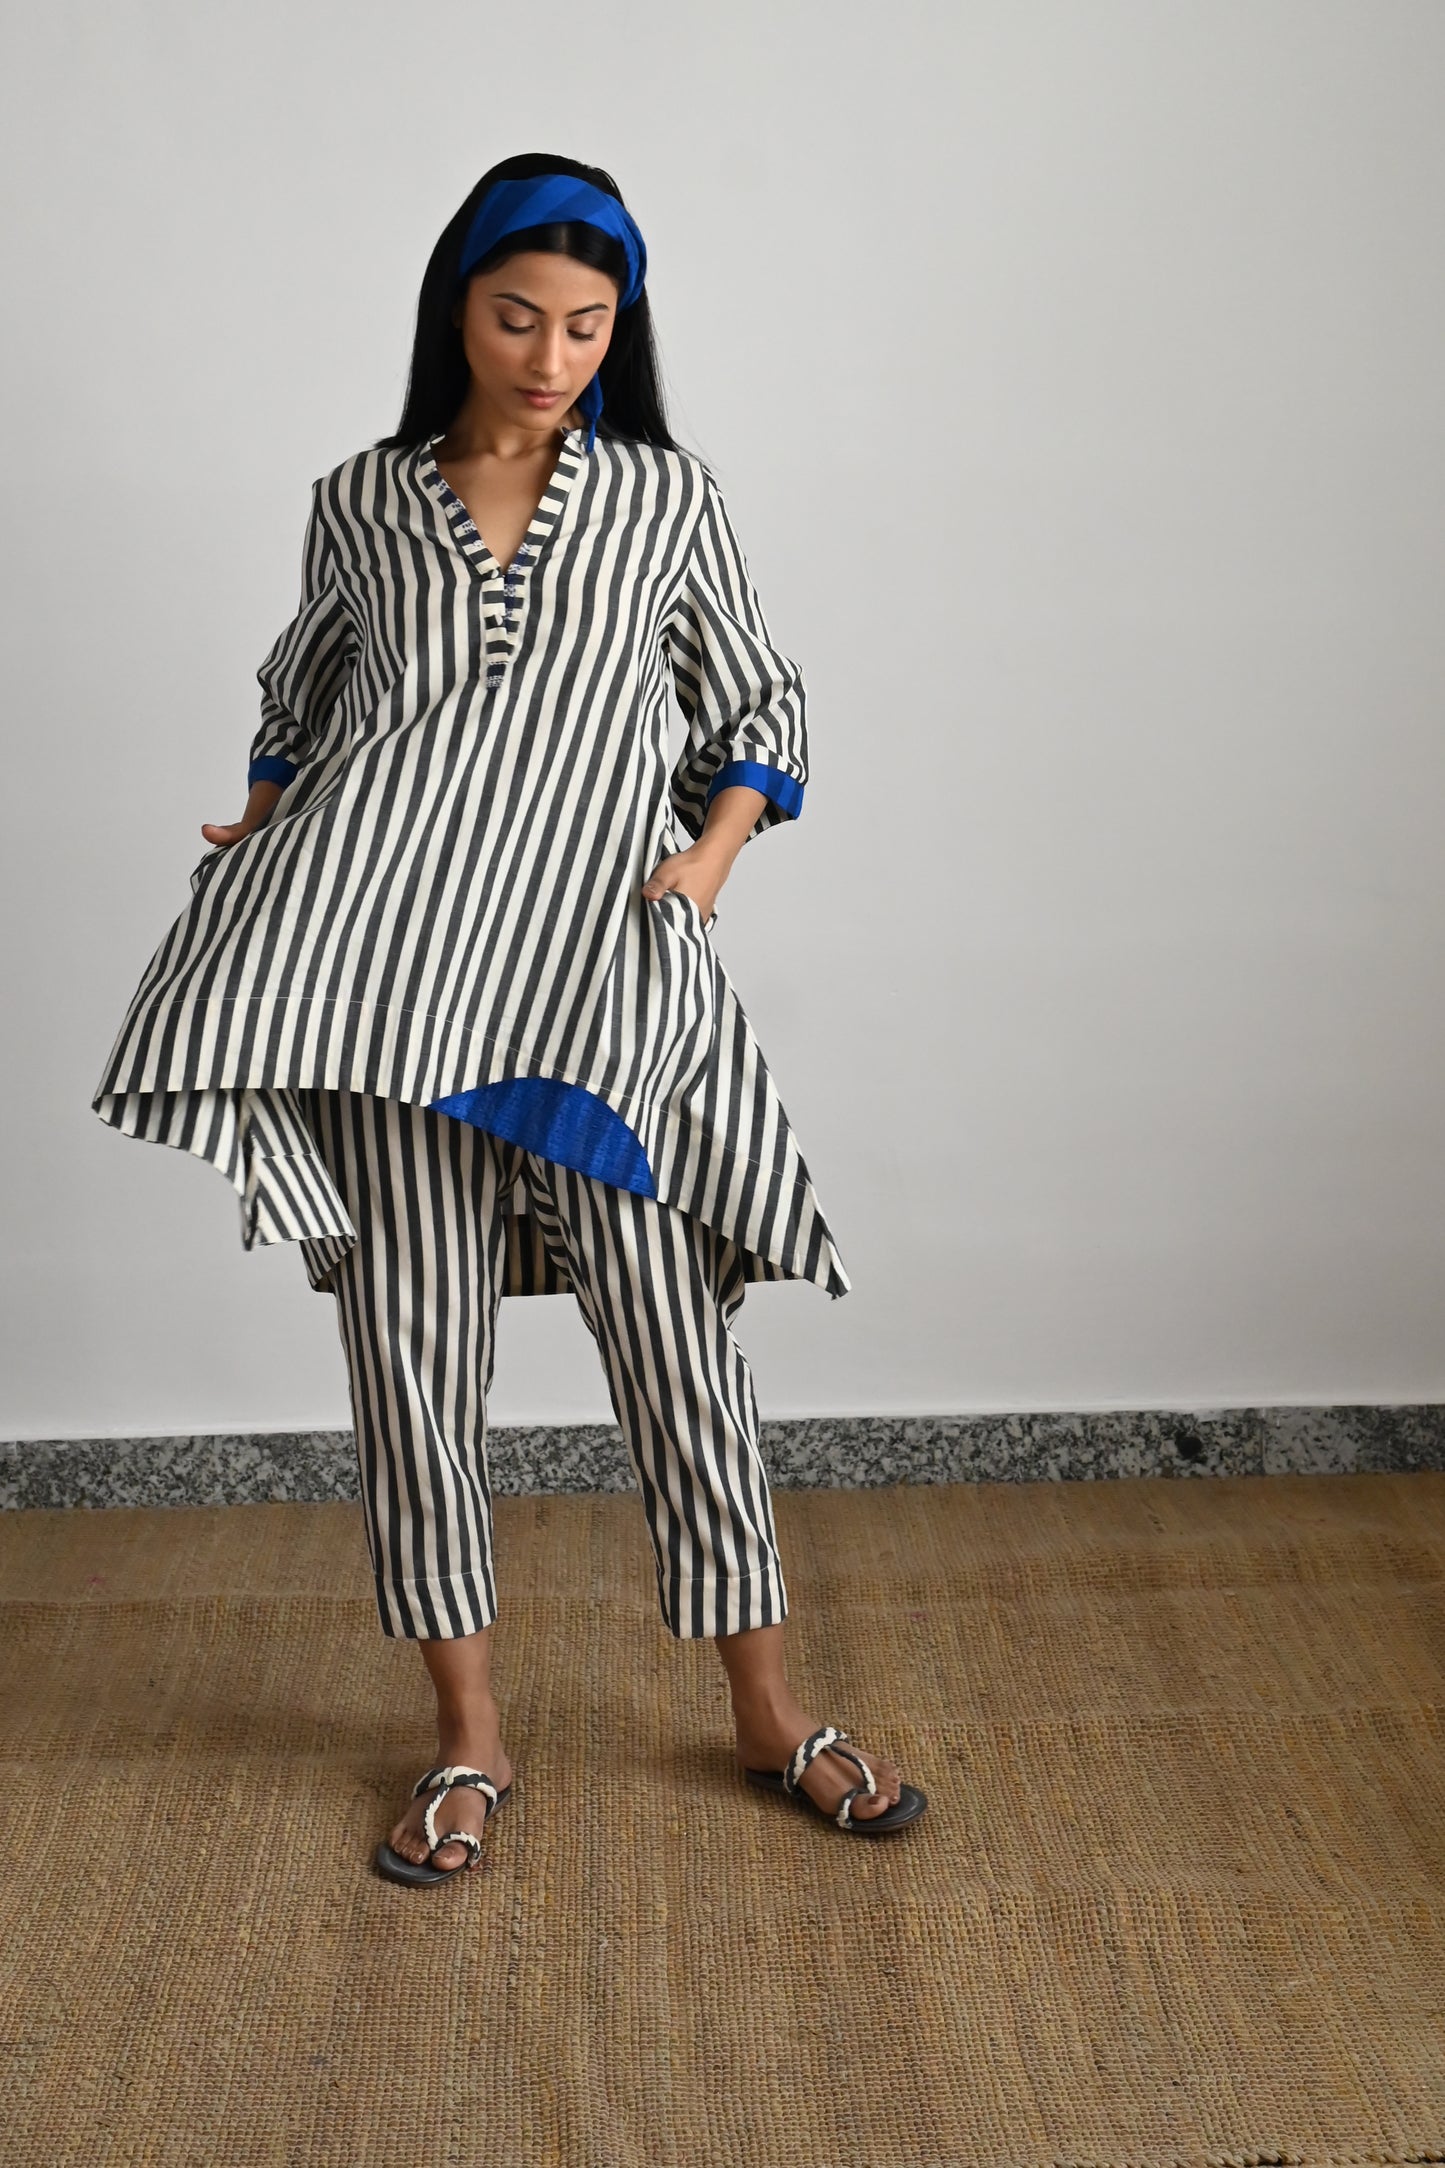 Oonch Neech Top in Black & White Stripes with Stripes Pant